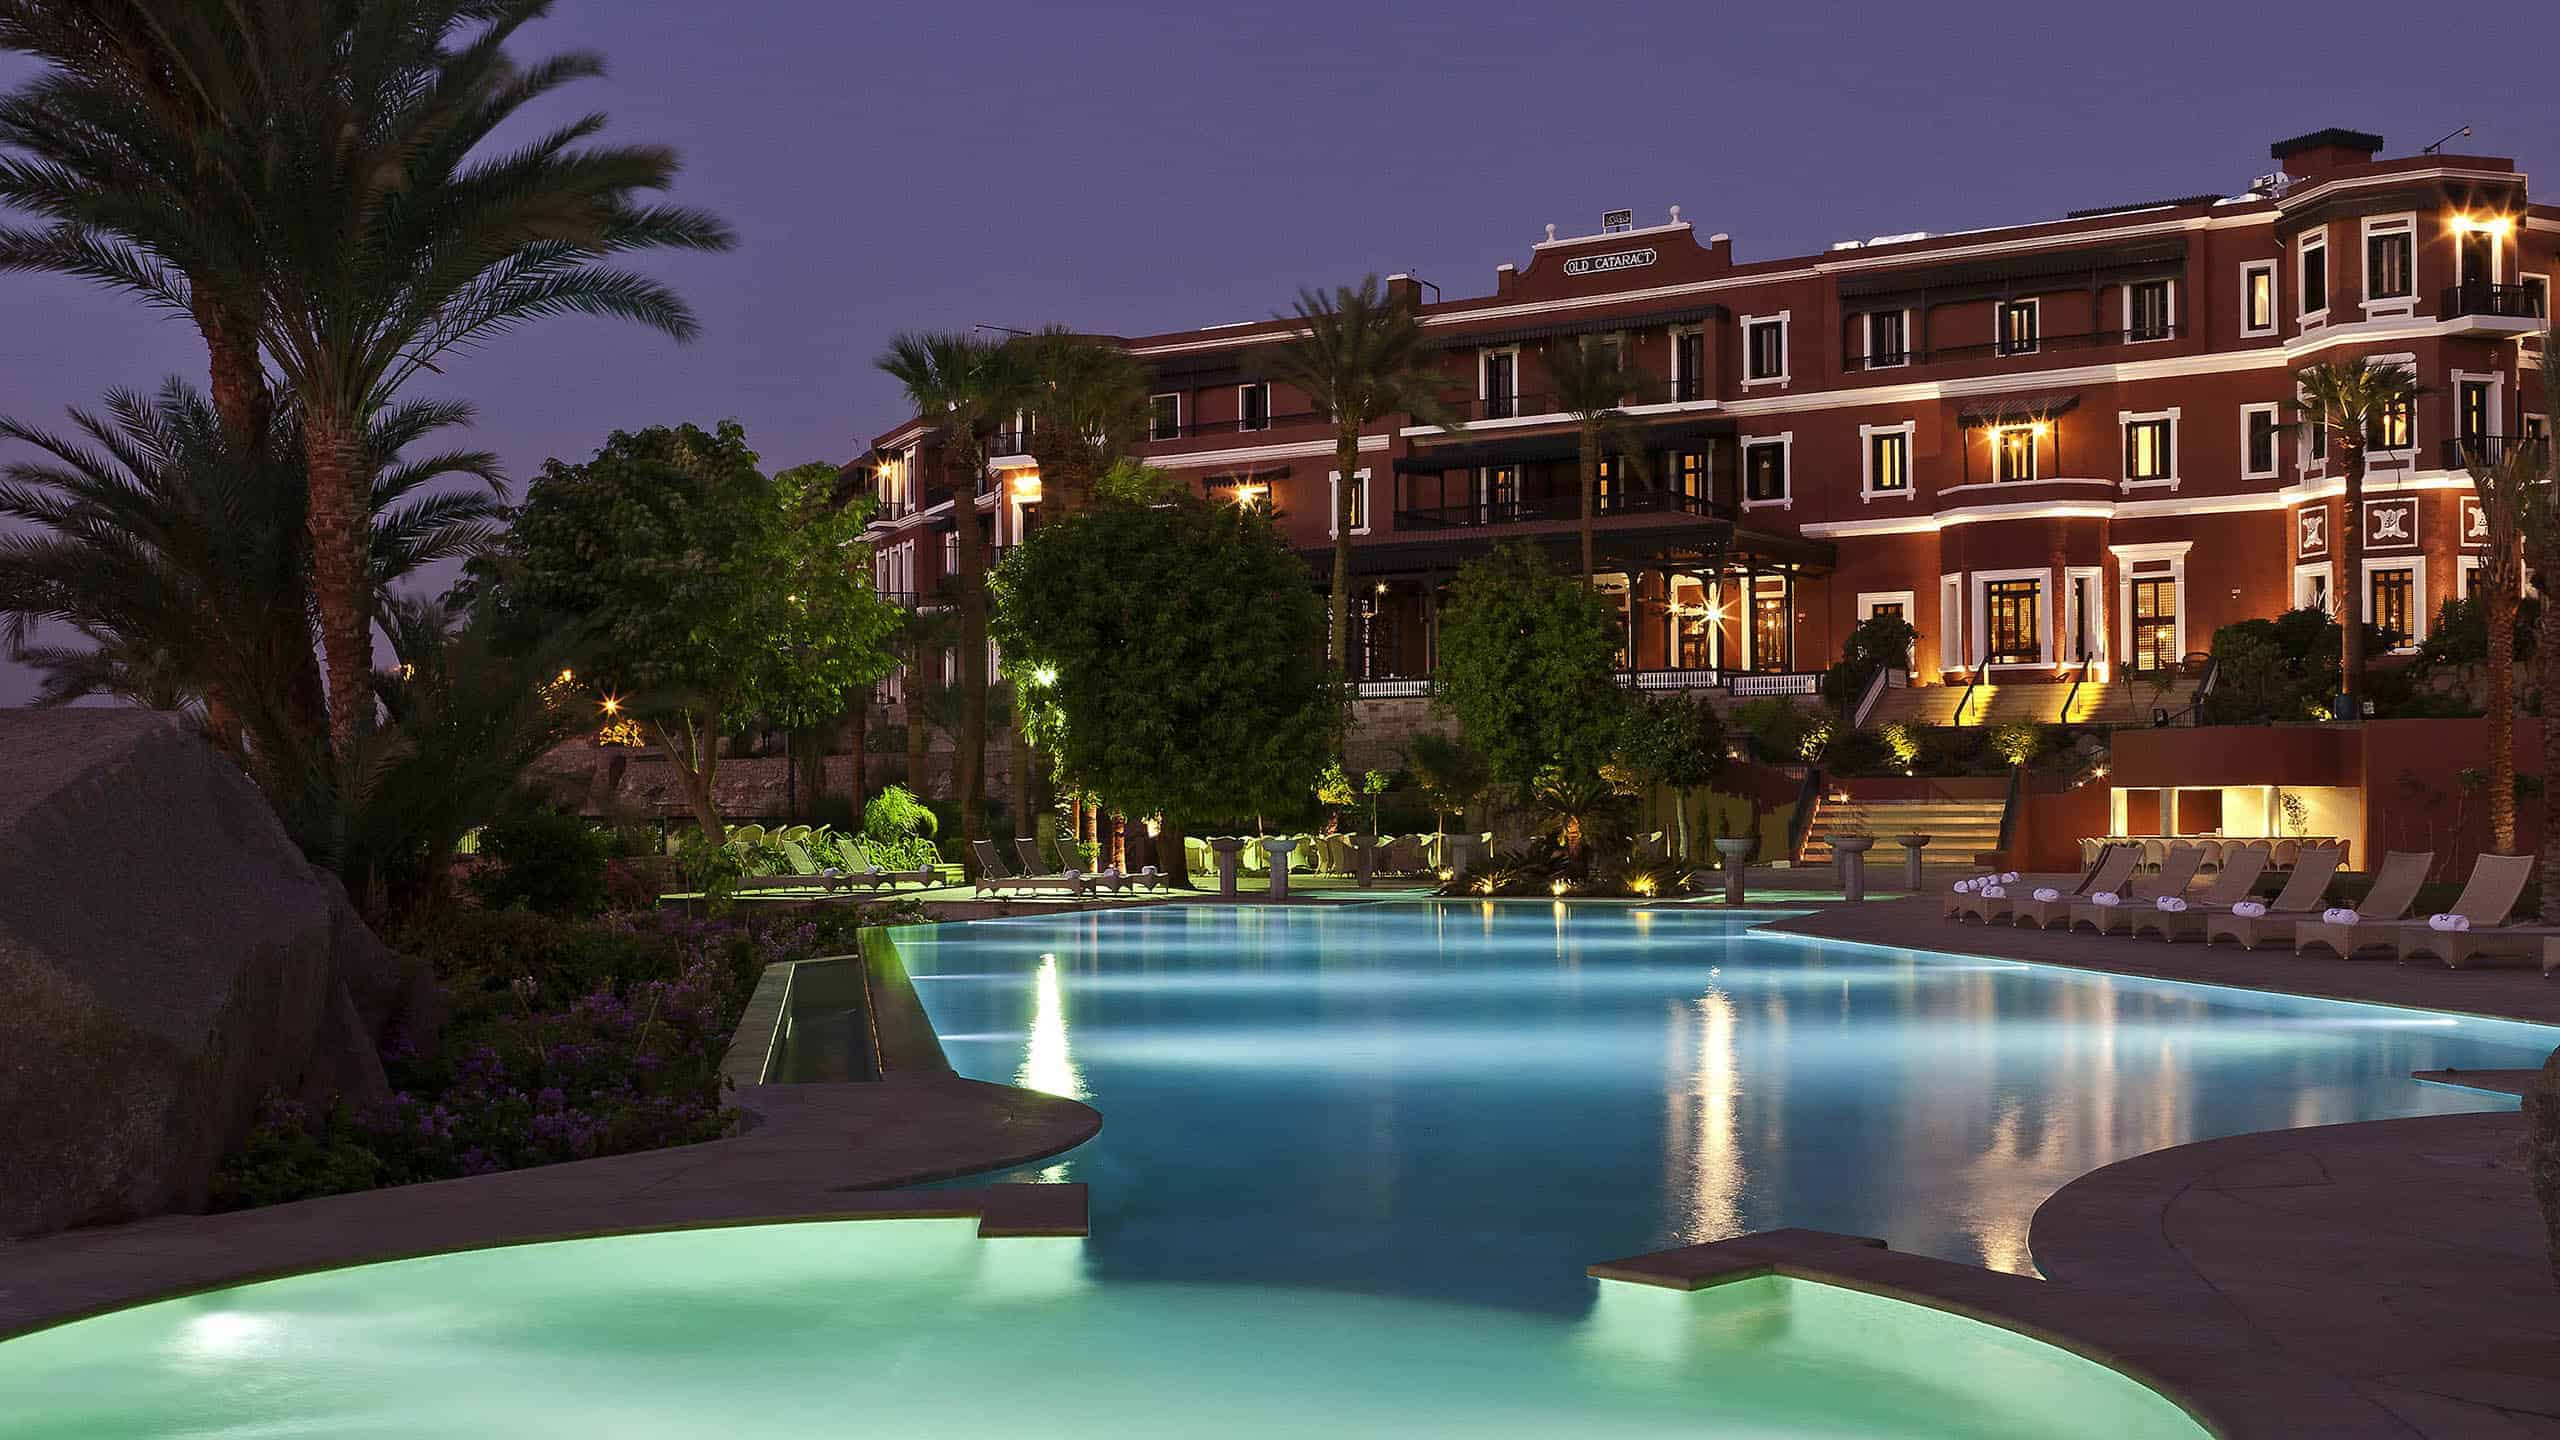 One of the best hotels in Aswan, Old cataract